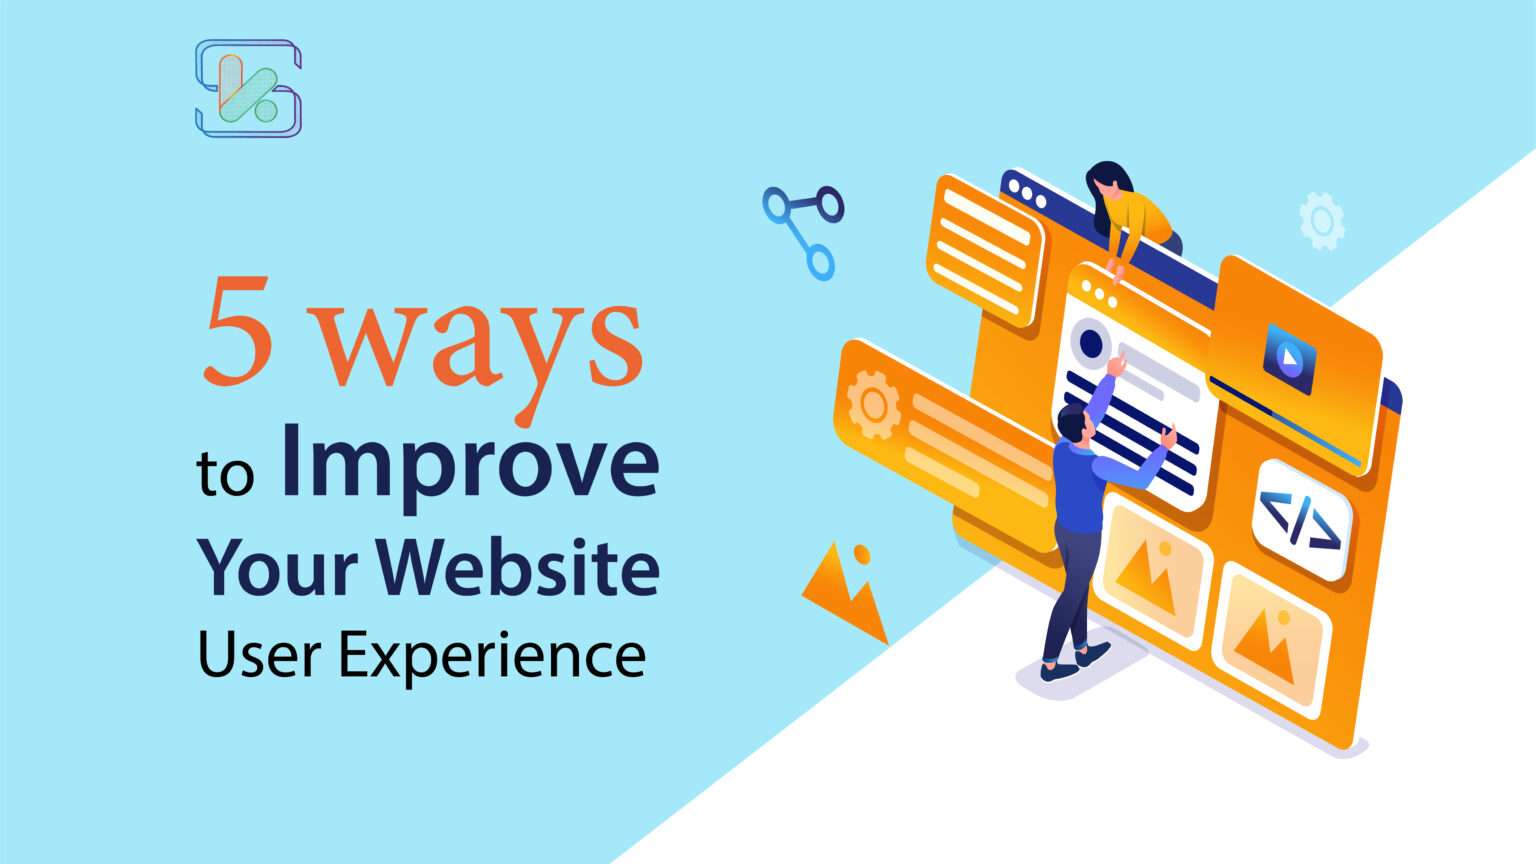 5 Ways to Improve Your Website User Experience